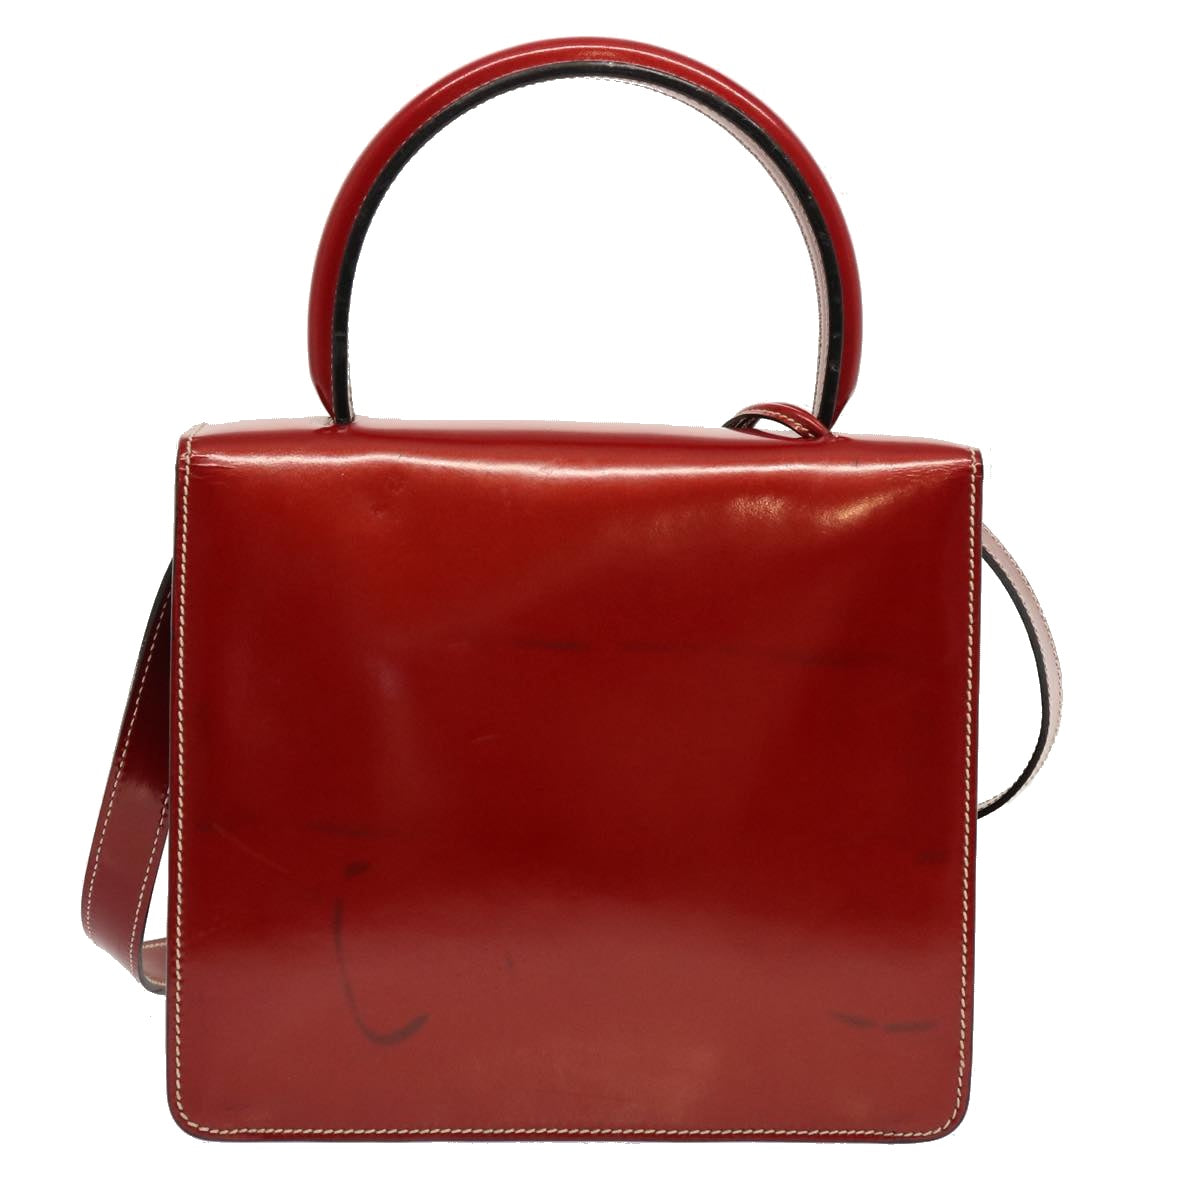 LOEWE Hand Bag Patent leather 2way Red Auth 69418 - 0